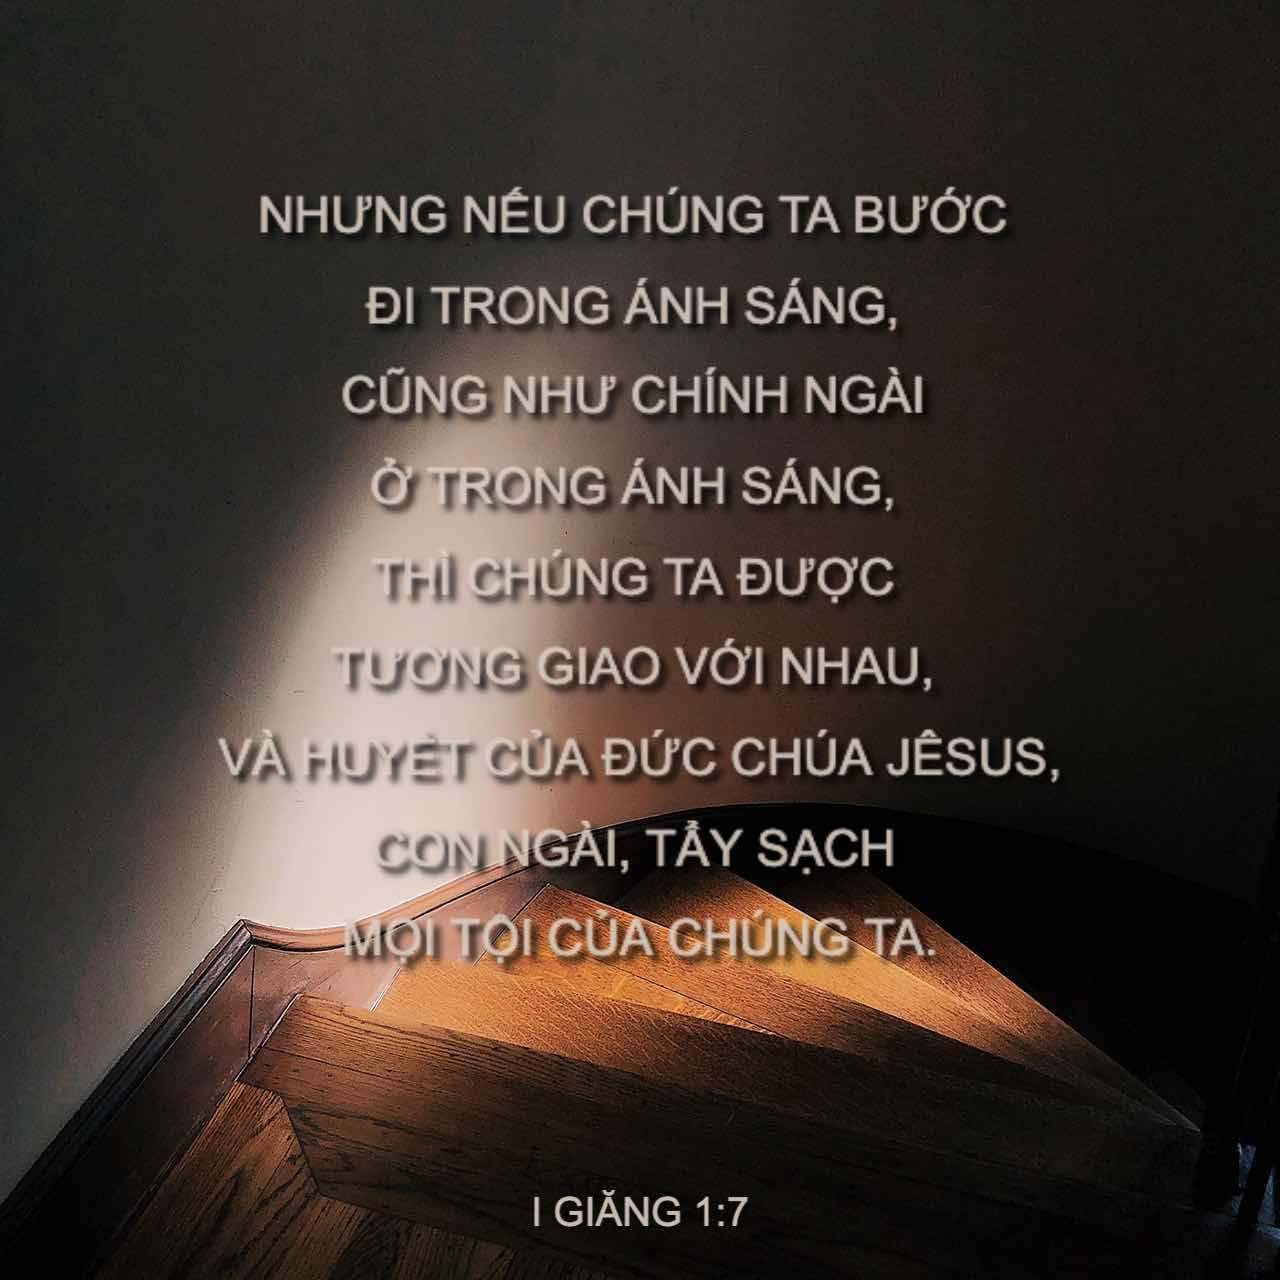 Bible Verse of the Day - day 157 - image 76886 (I Giăng 1:7)